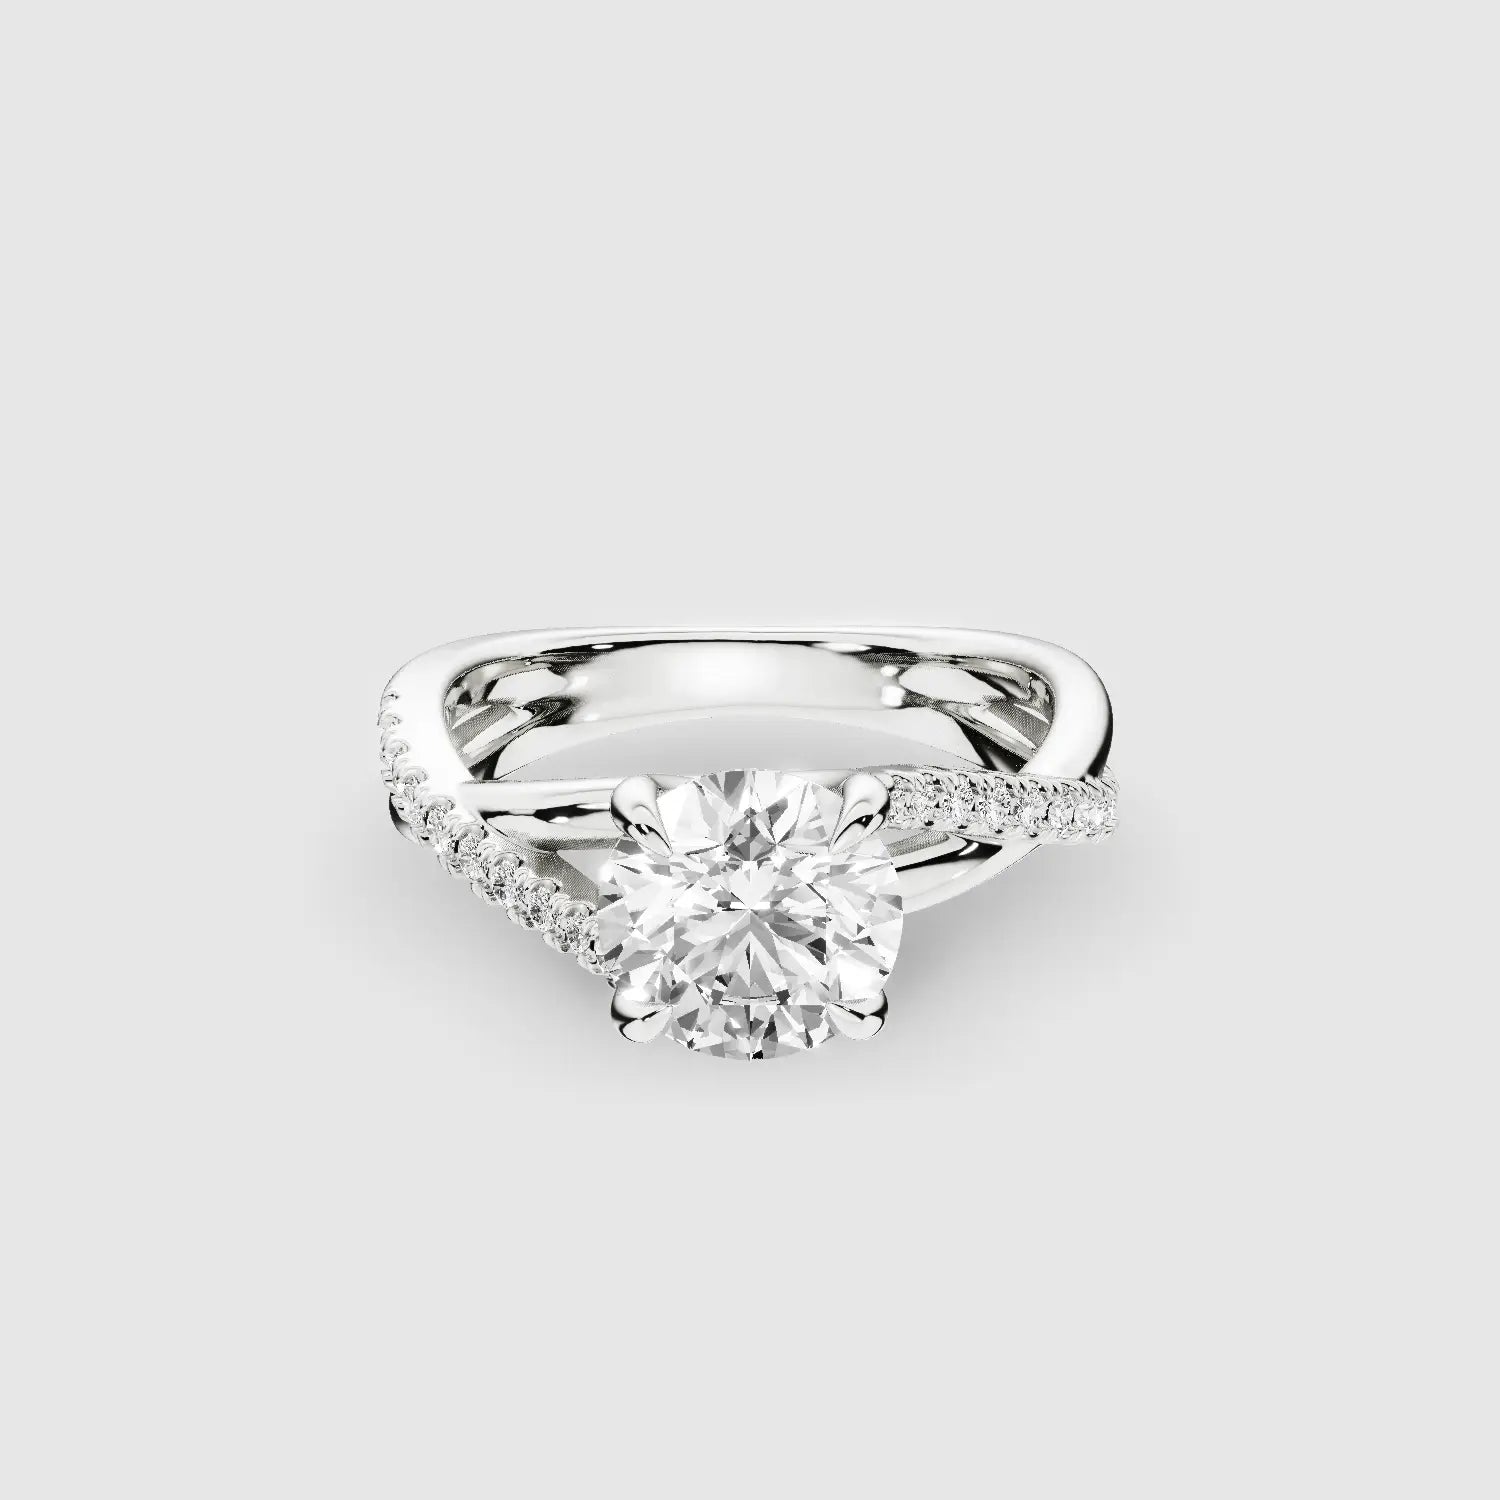 Engagement Rings for Every Kind of Bride